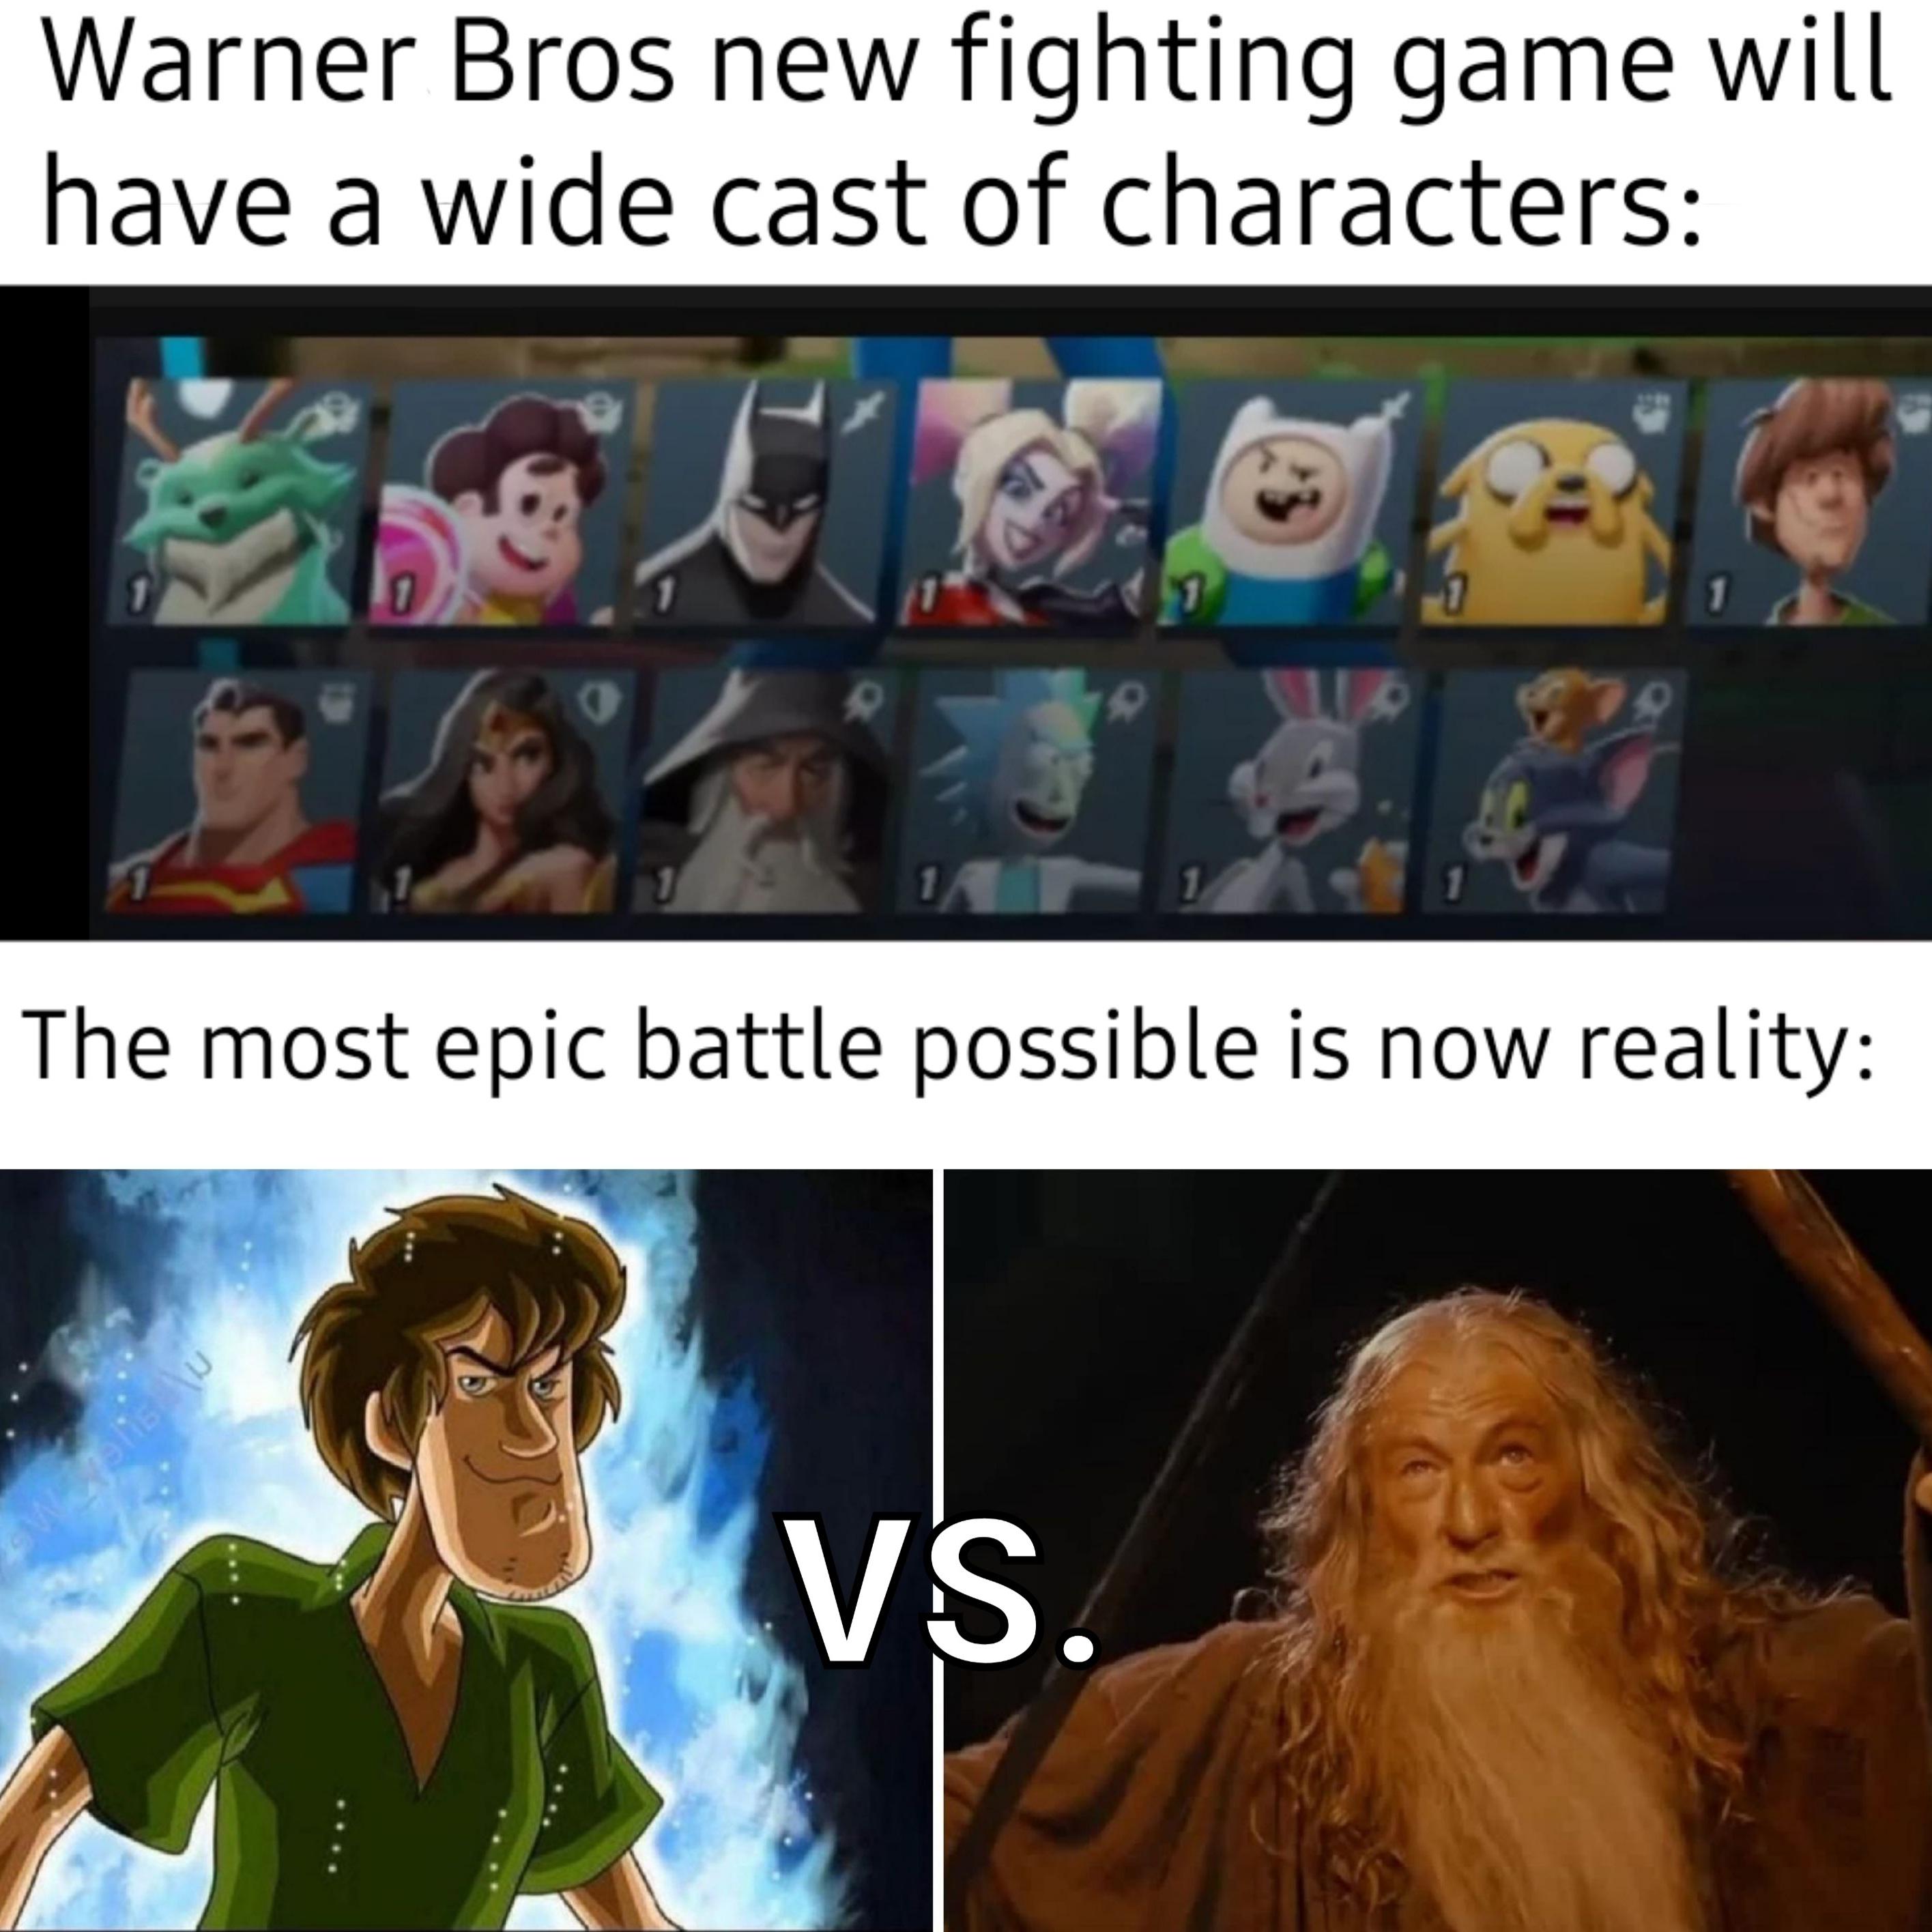 you shall not post - Warner Bros new fighting game will have a wide cast of characters Elto 92 1 2 1 1 The most epic battle possible is now reality M Vs. 2